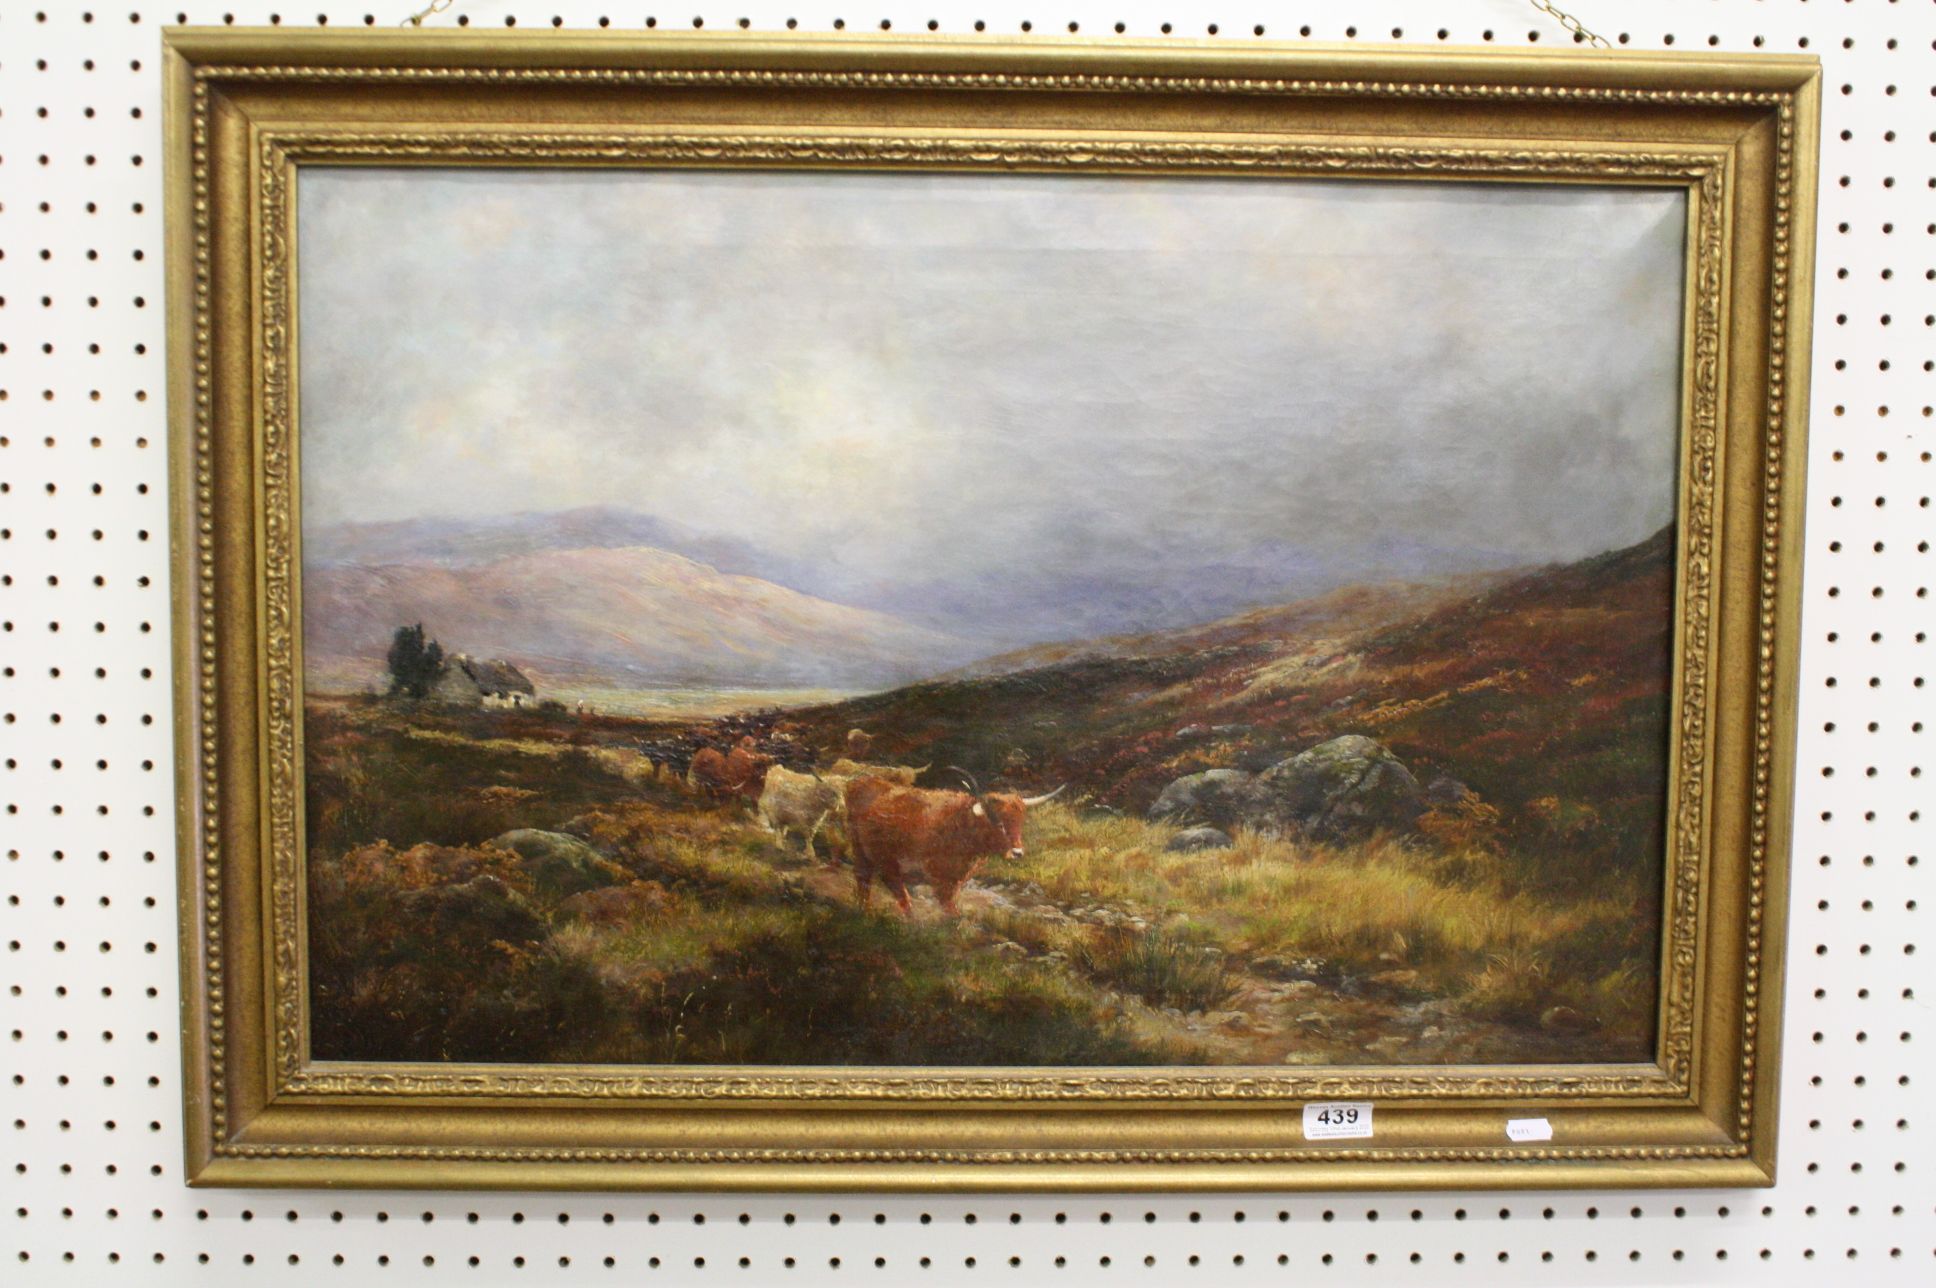 Henry Hadfield Cubley (British 1858-1934), Oil Painting on Canvas of a Highland Cattle Scene, marked